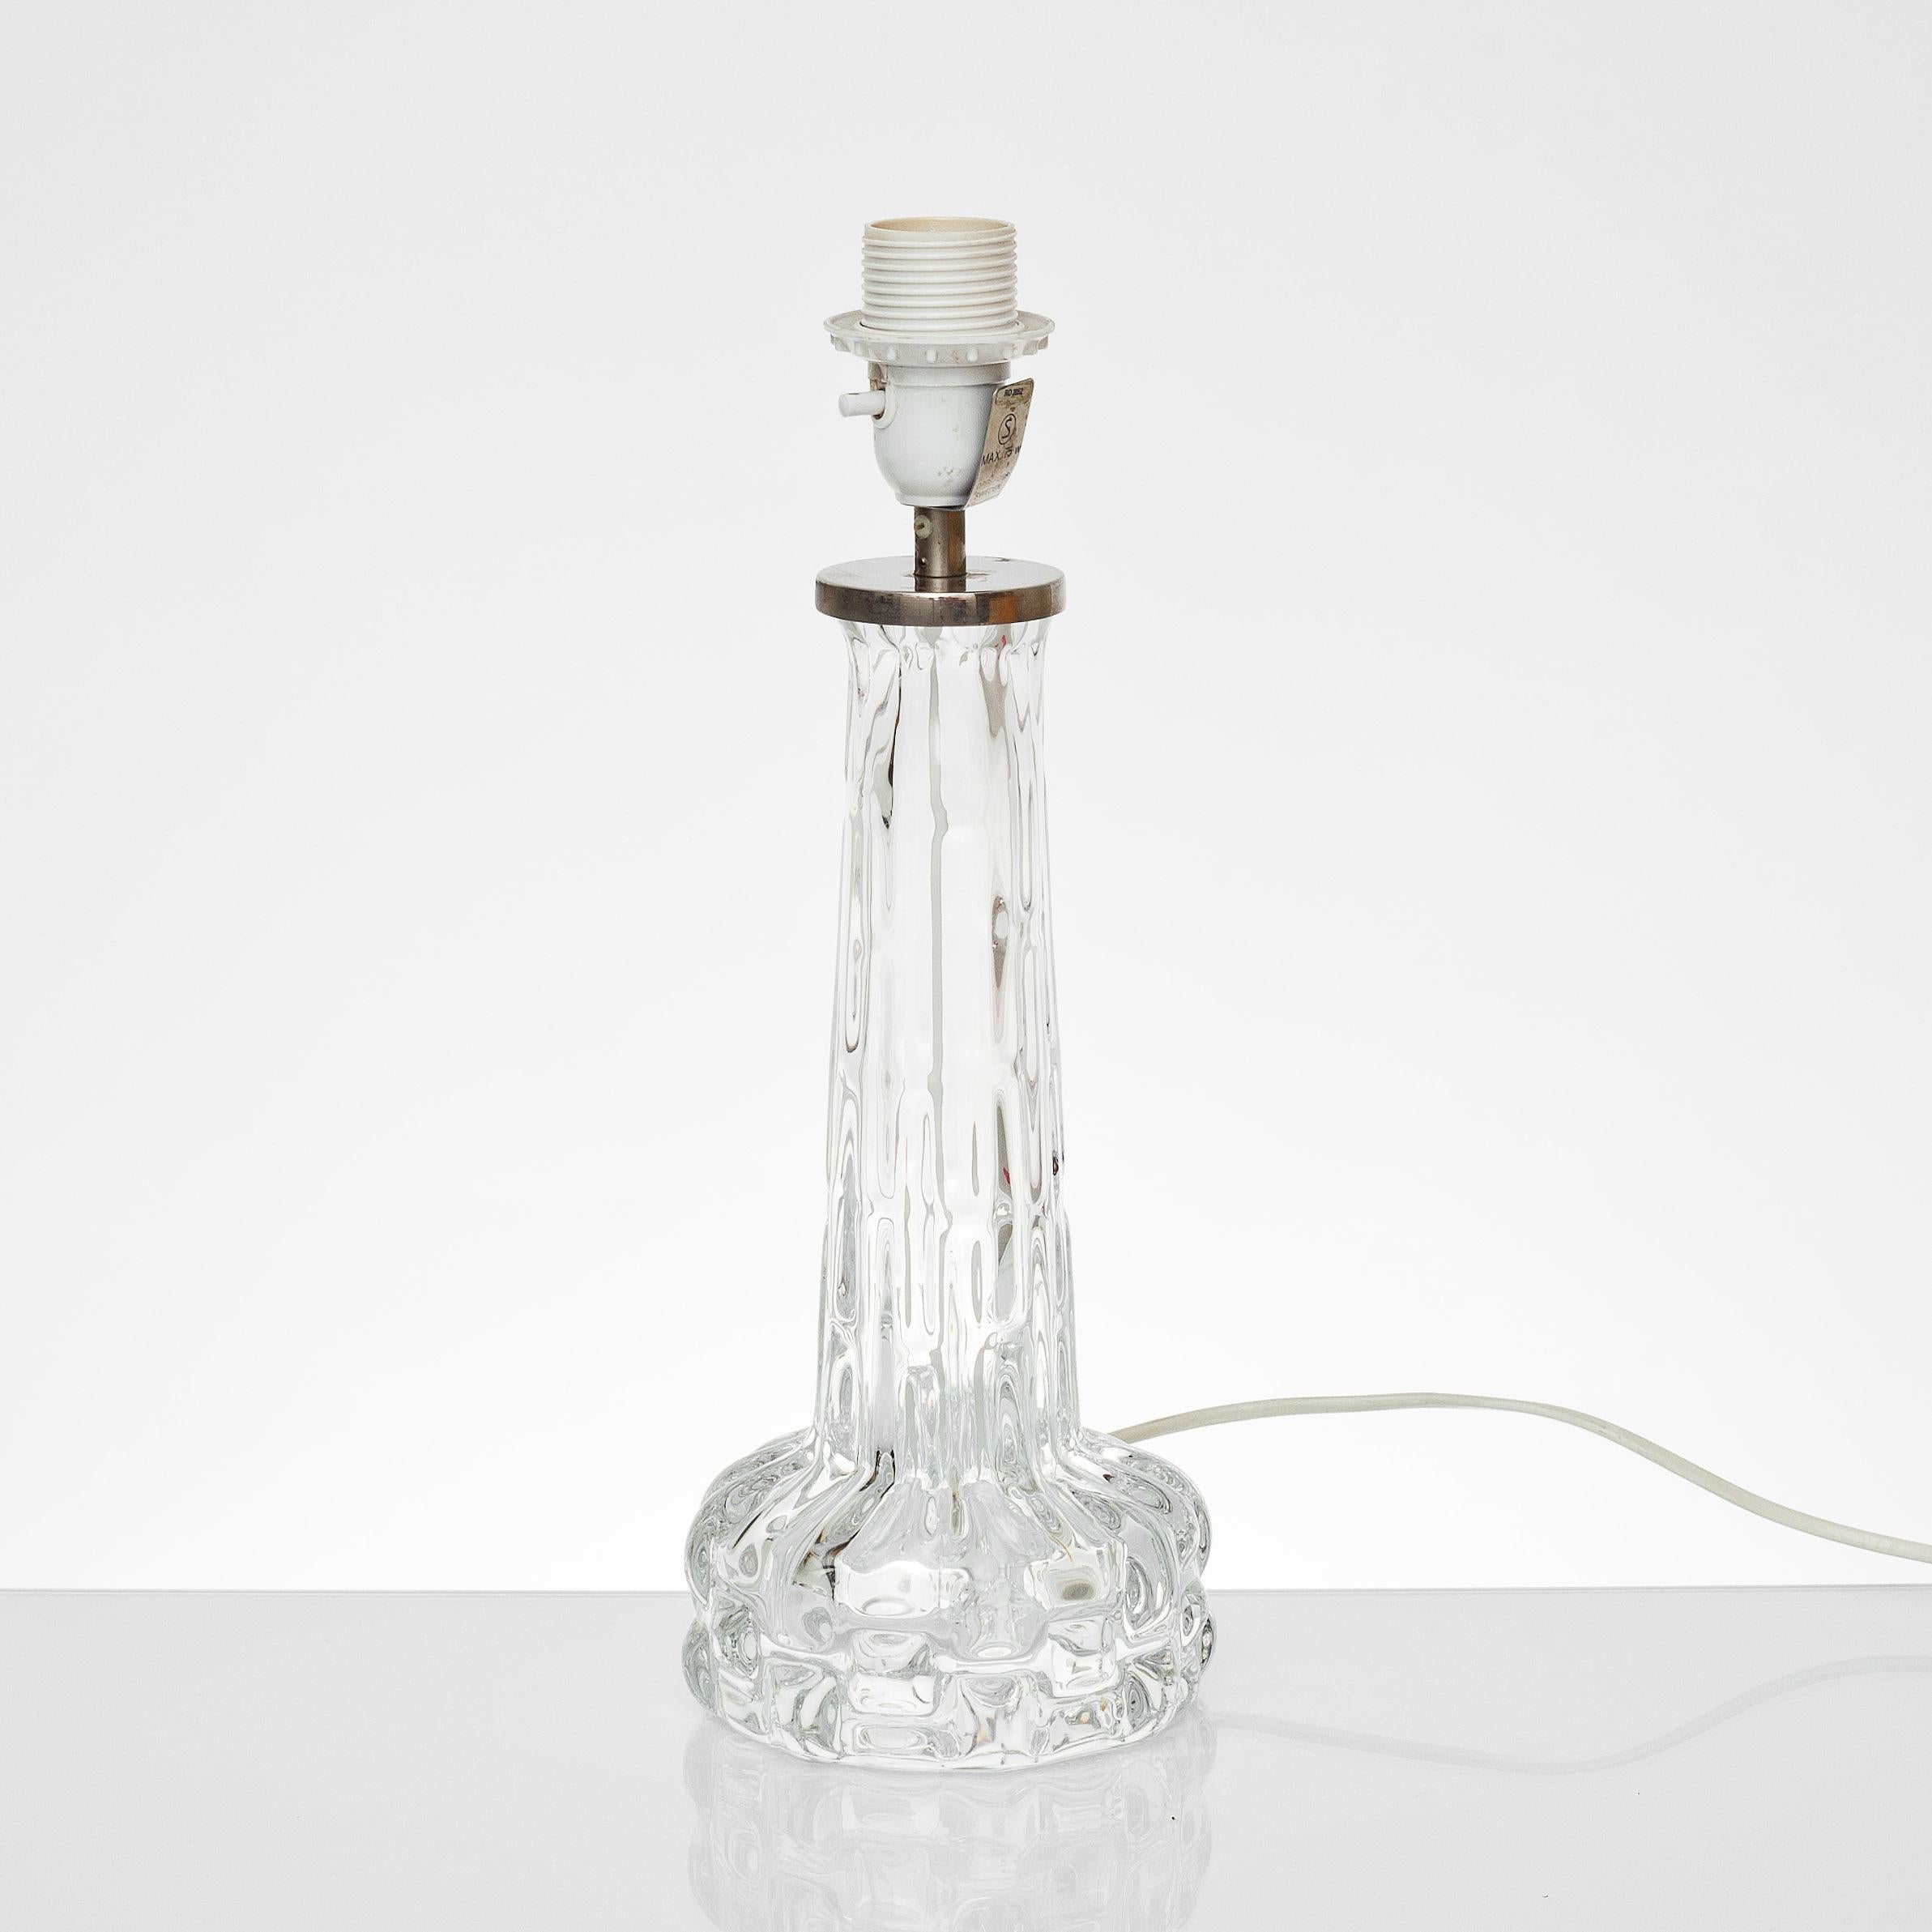 TABLE LAMP designed by Carl Fagerlund for Orrefors. mid-20th century.
Lamp base in glass. Height 38 incl. lamp base. With shade height 66. approx.
Good condition